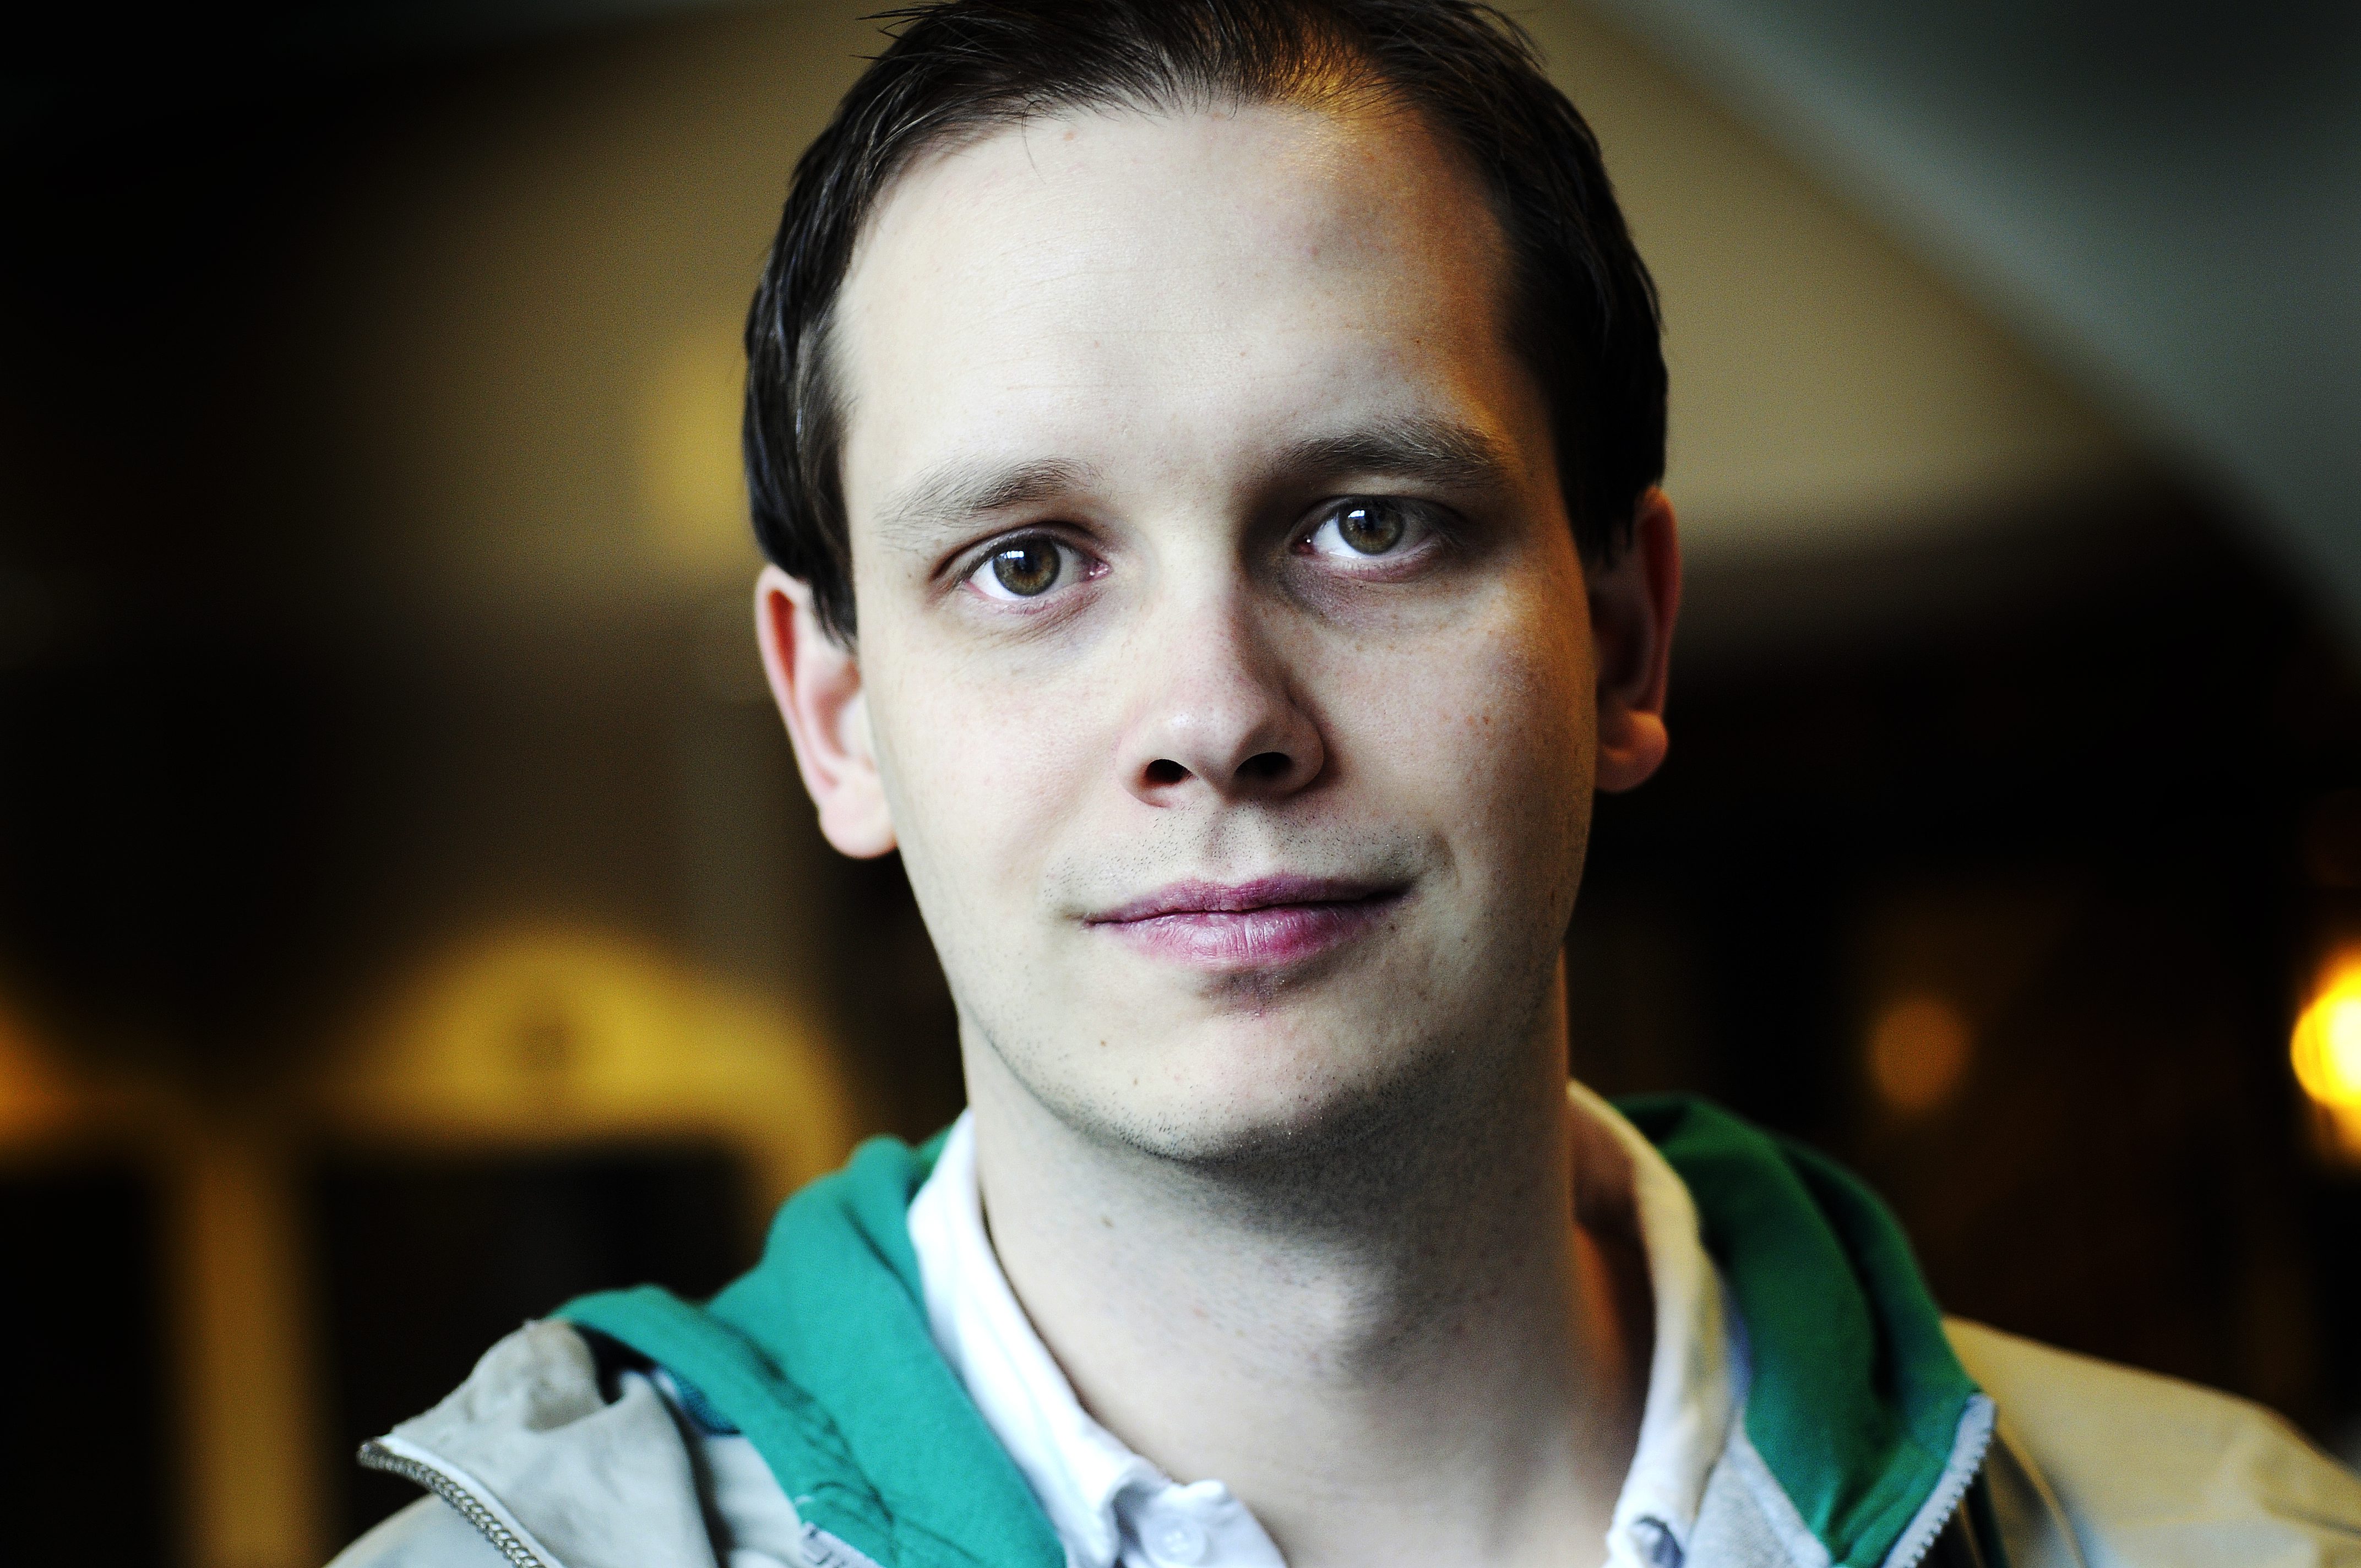 Peter Sunde, Fildelning, The Pirate Bay